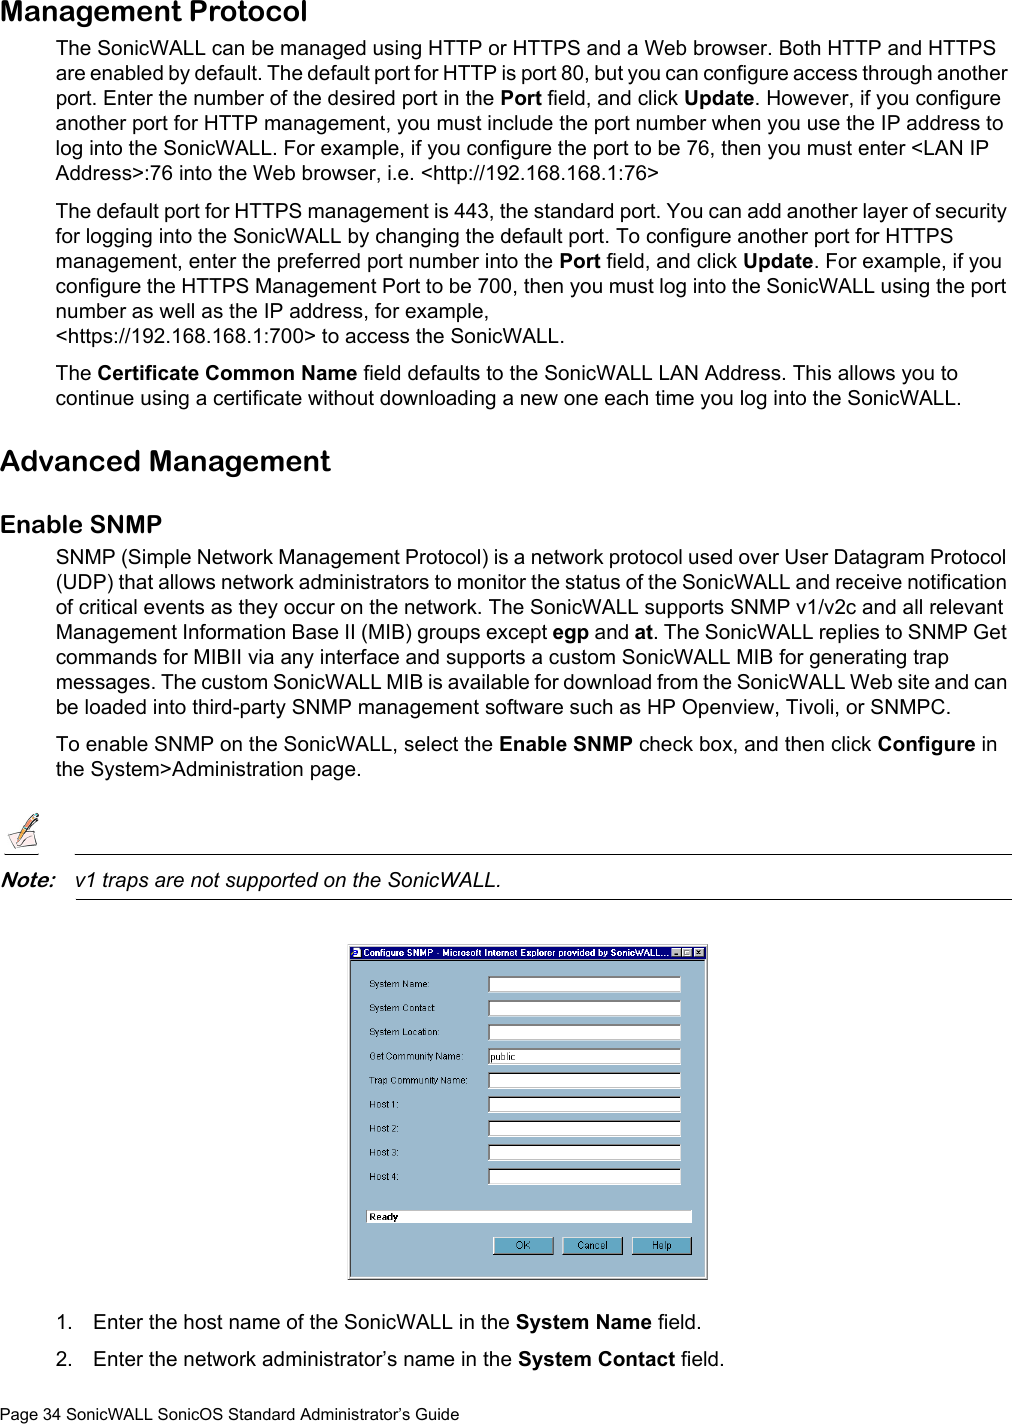 Page 34 SonicWALL SonicOS Standard Administrator’s GuideManagement ProtocolThe SonicWALL can be managed using HTTP or HTTPS and a Web browser. Both HTTP and HTTPS are enabled by default. The default port for HTTP is port 80, but you can configure access through another port. Enter the number of the desired port in the Port field, and click Update. However, if you configure another port for HTTP management, you must include the port number when you use the IP address to log into the SonicWALL. For example, if you configure the port to be 76, then you must enter &lt;LAN IP Address&gt;:76 into the Web browser, i.e. &lt;http://192.168.168.1:76&gt;The default port for HTTPS management is 443, the standard port. You can add another layer of security for logging into the SonicWALL by changing the default port. To configure another port for HTTPS management, enter the preferred port number into the Port field, and click Update. For example, if you configure the HTTPS Management Port to be 700, then you must log into the SonicWALL using the port number as well as the IP address, for example, &lt;https://192.168.168.1:700&gt; to access the SonicWALL. The Certificate Common Name field defaults to the SonicWALL LAN Address. This allows you to continue using a certificate without downloading a new one each time you log into the SonicWALL.Advanced ManagementEnable SNMPSNMP (Simple Network Management Protocol) is a network protocol used over User Datagram Protocol (UDP) that allows network administrators to monitor the status of the SonicWALL and receive notification of critical events as they occur on the network. The SonicWALL supports SNMP v1/v2c and all relevant Management Information Base II (MIB) groups except egp and at. The SonicWALL replies to SNMP Get commands for MIBII via any interface and supports a custom SonicWALL MIB for generating trap messages. The custom SonicWALL MIB is available for download from the SonicWALL Web site and can be loaded into third-party SNMP management software such as HP Openview, Tivoli, or SNMPC. To enable SNMP on the SonicWALL, select the Enable SNMP check box, and then click Configure in the System&gt;Administration page.Note:v1 traps are not supported on the SonicWALL.1. Enter the host name of the SonicWALL in the System Name field. 2. Enter the network administrator’s name in the System Contact field. 